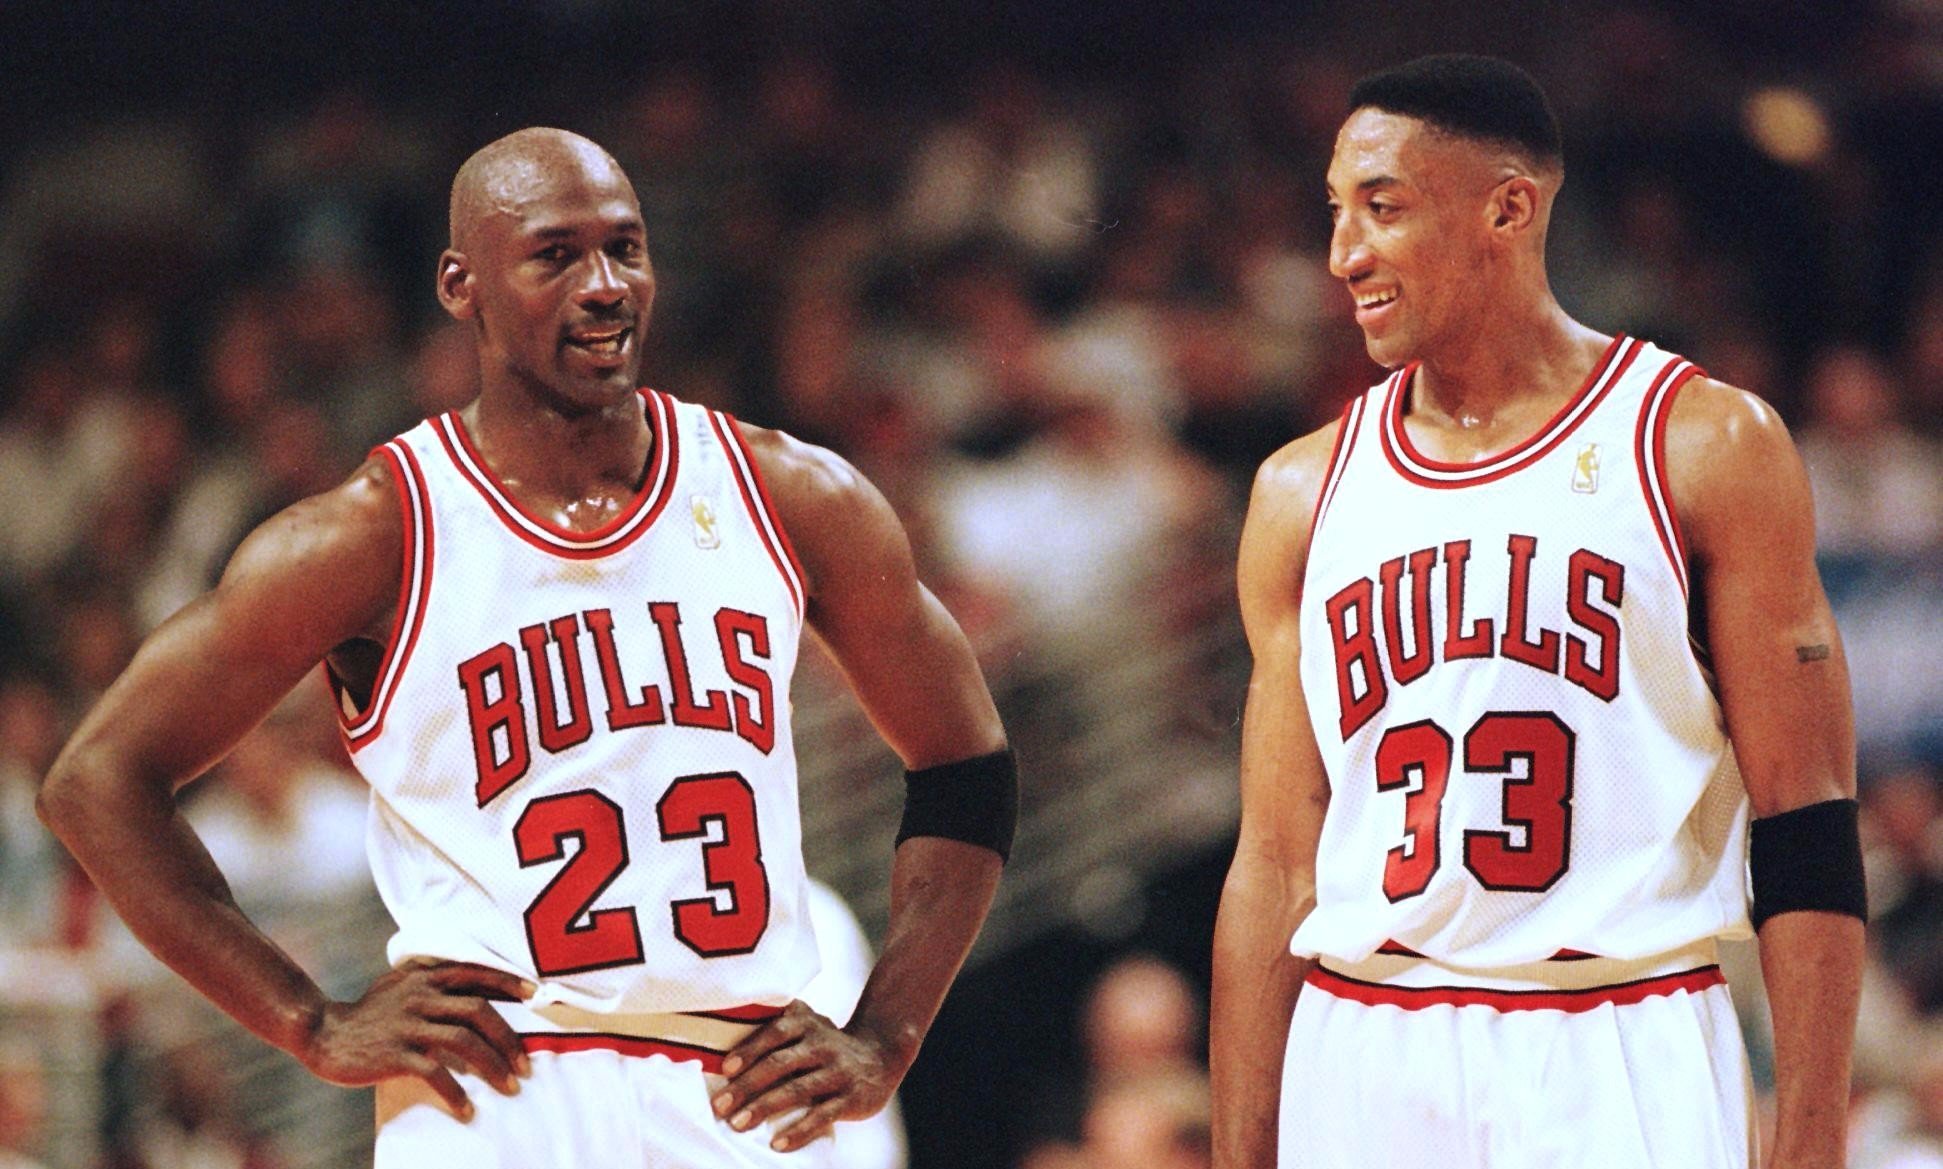 The Last Dance cast now: Here's what happened to Scottie Pippen, Dennis Rodman and Michael Jordan's other Chicago Bulls teammates